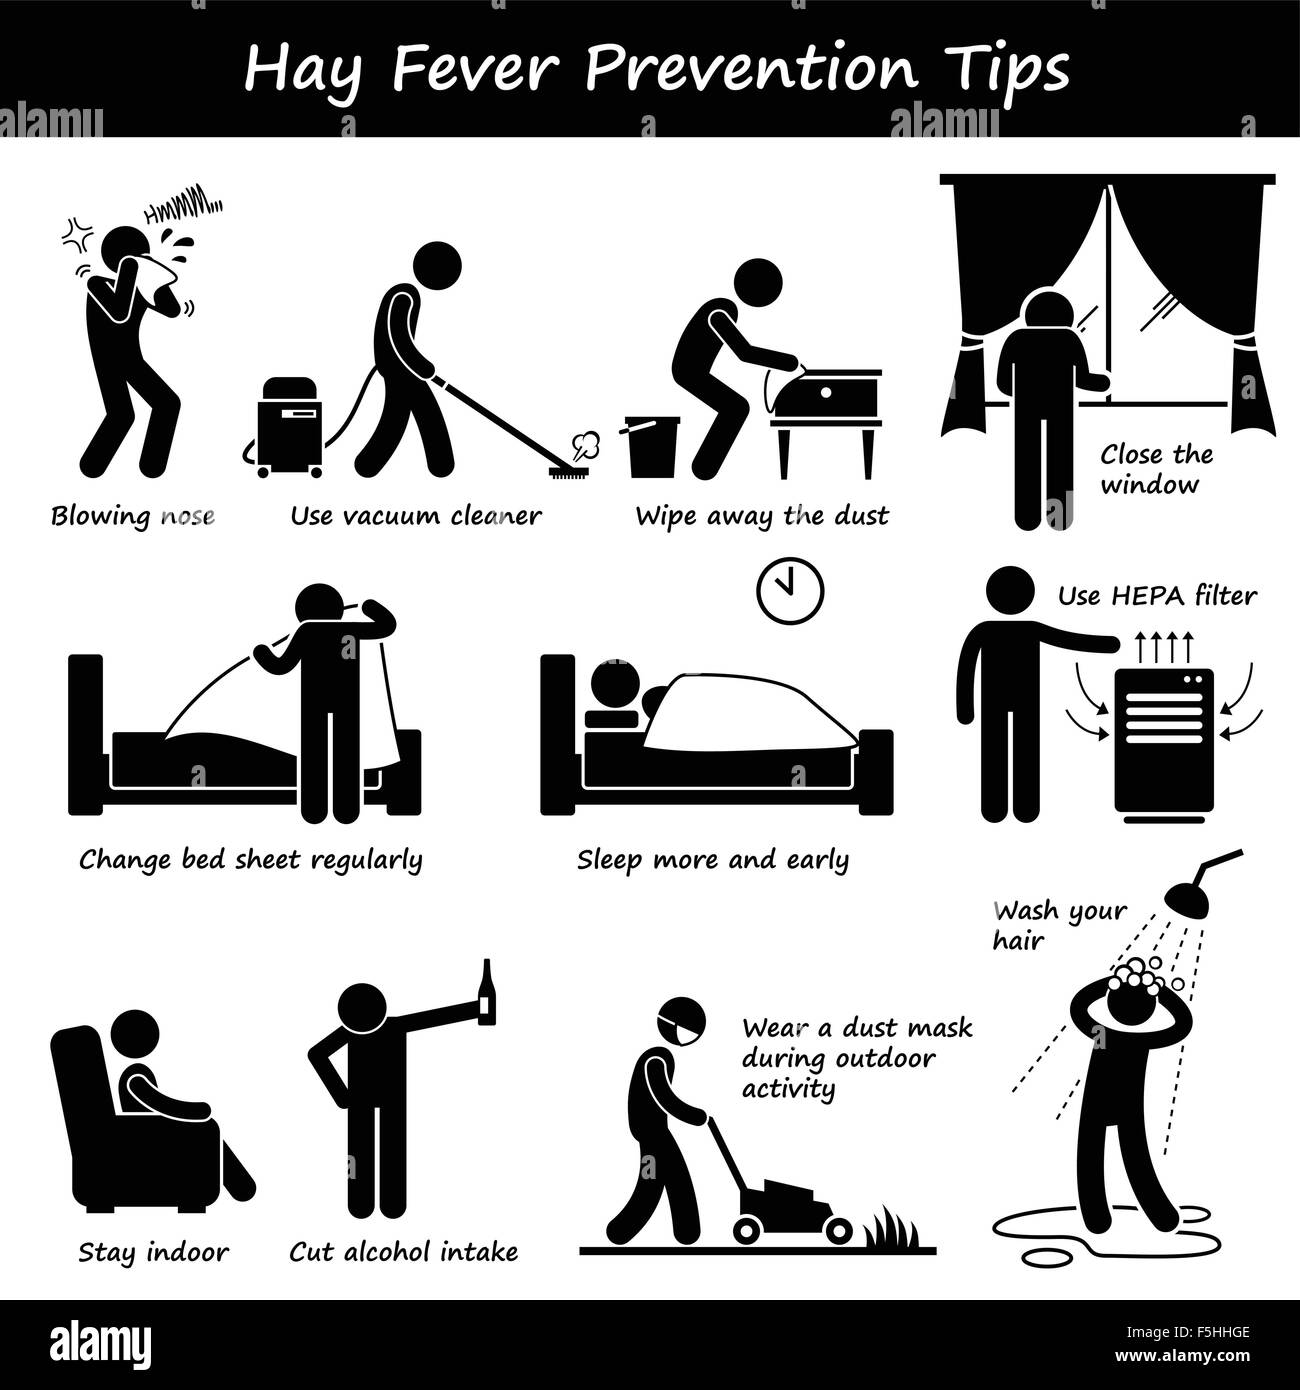 Hay Fever Prevention Allergy Tips Stick Figure Pictogram Icons Stock Vector